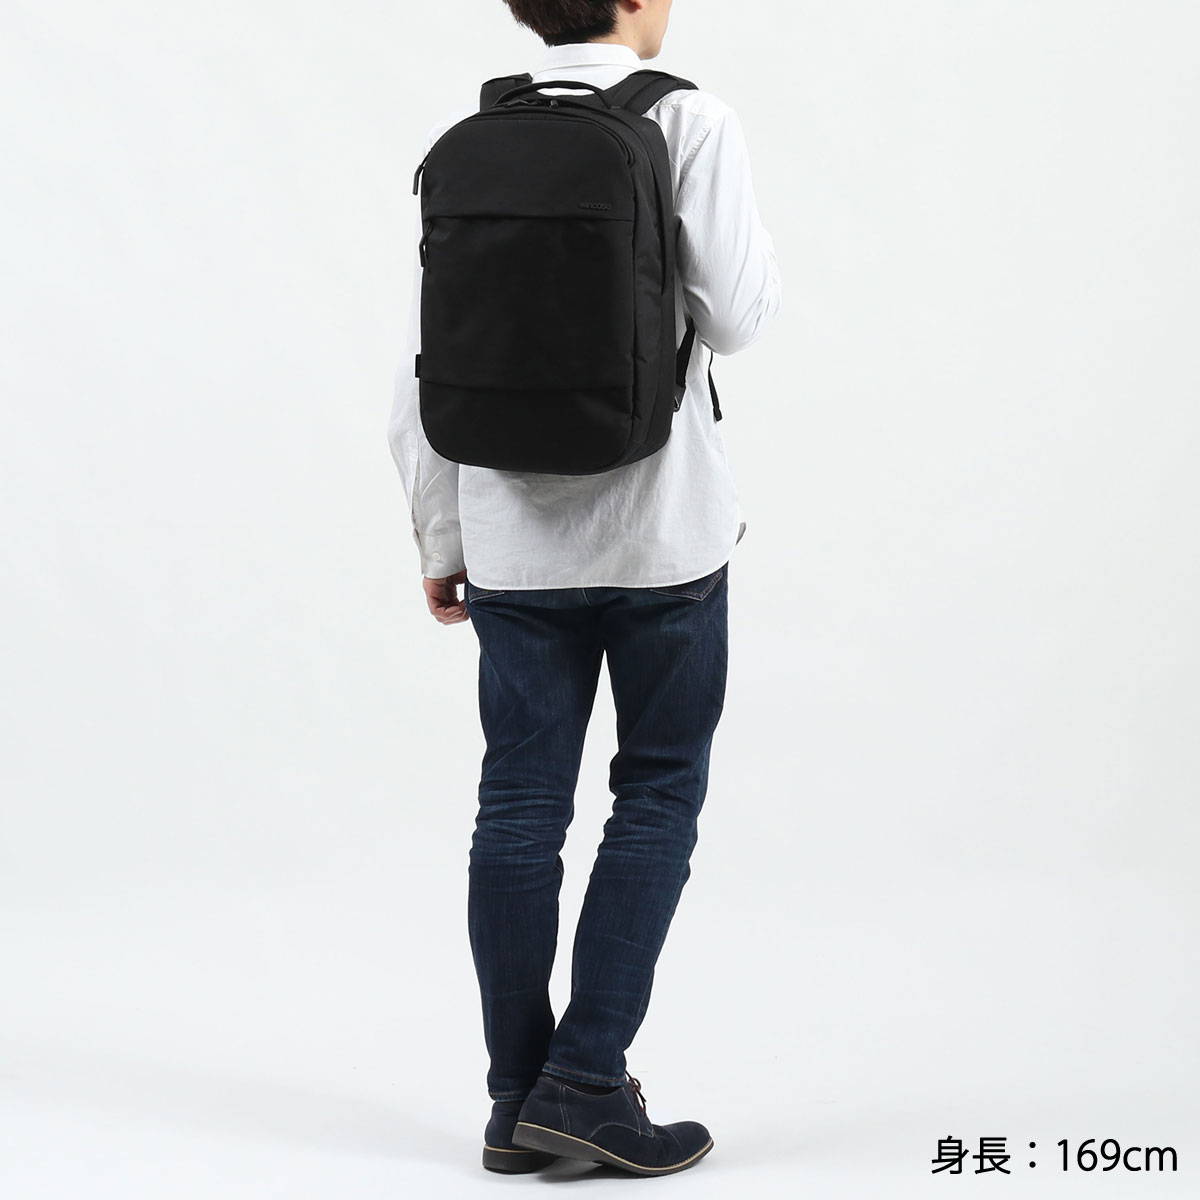 incase City Backpack